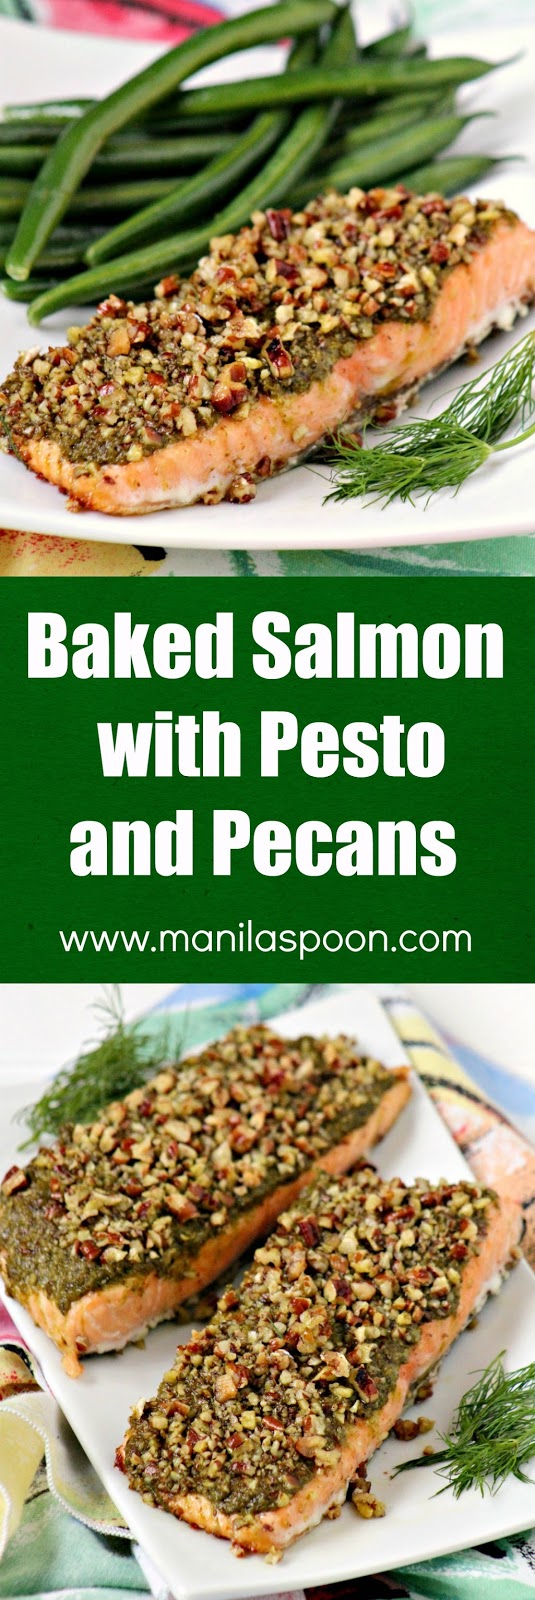 Just 3 ingredients to make this easy, quick and very tasty Baked Salmon with Pesto and Pecans. Even non-Salmon fans will love this! | manilaspoon.com